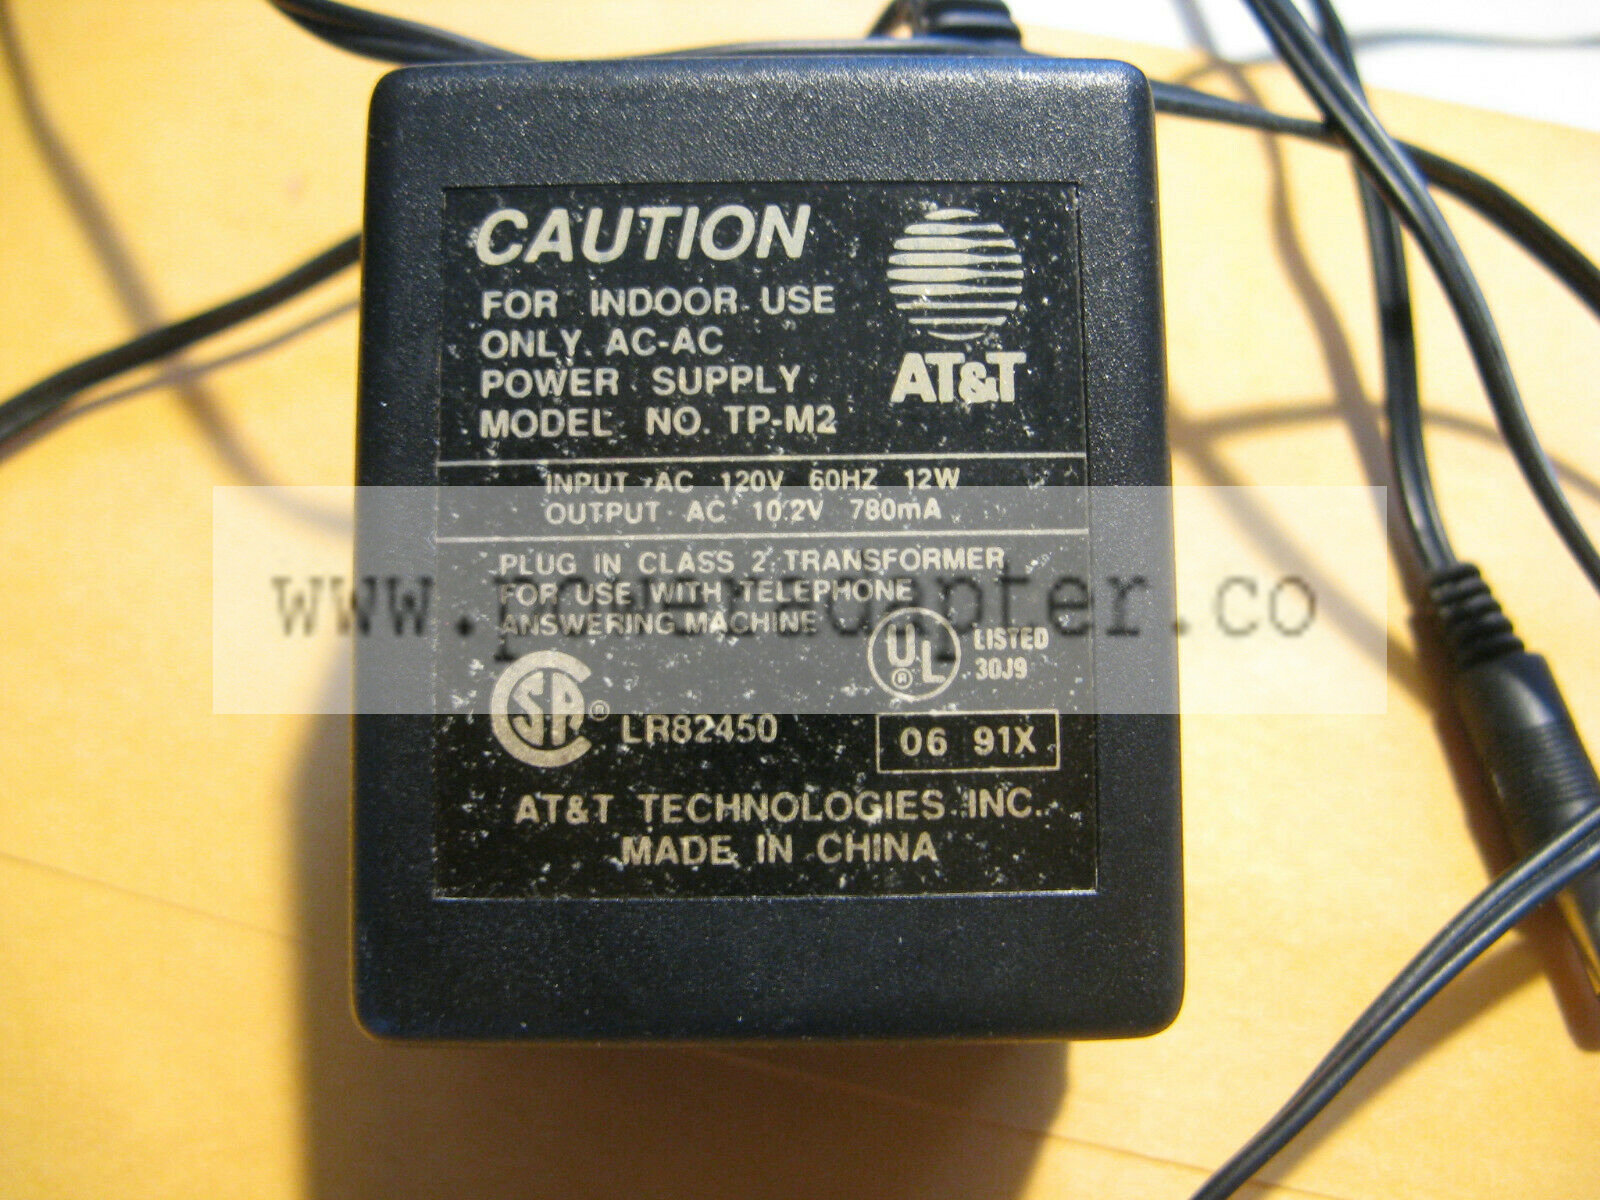 AT&T power cord adapter transformer TP-M2 For sale is this nice AT&T power adapter transformer unit. Descriptions of